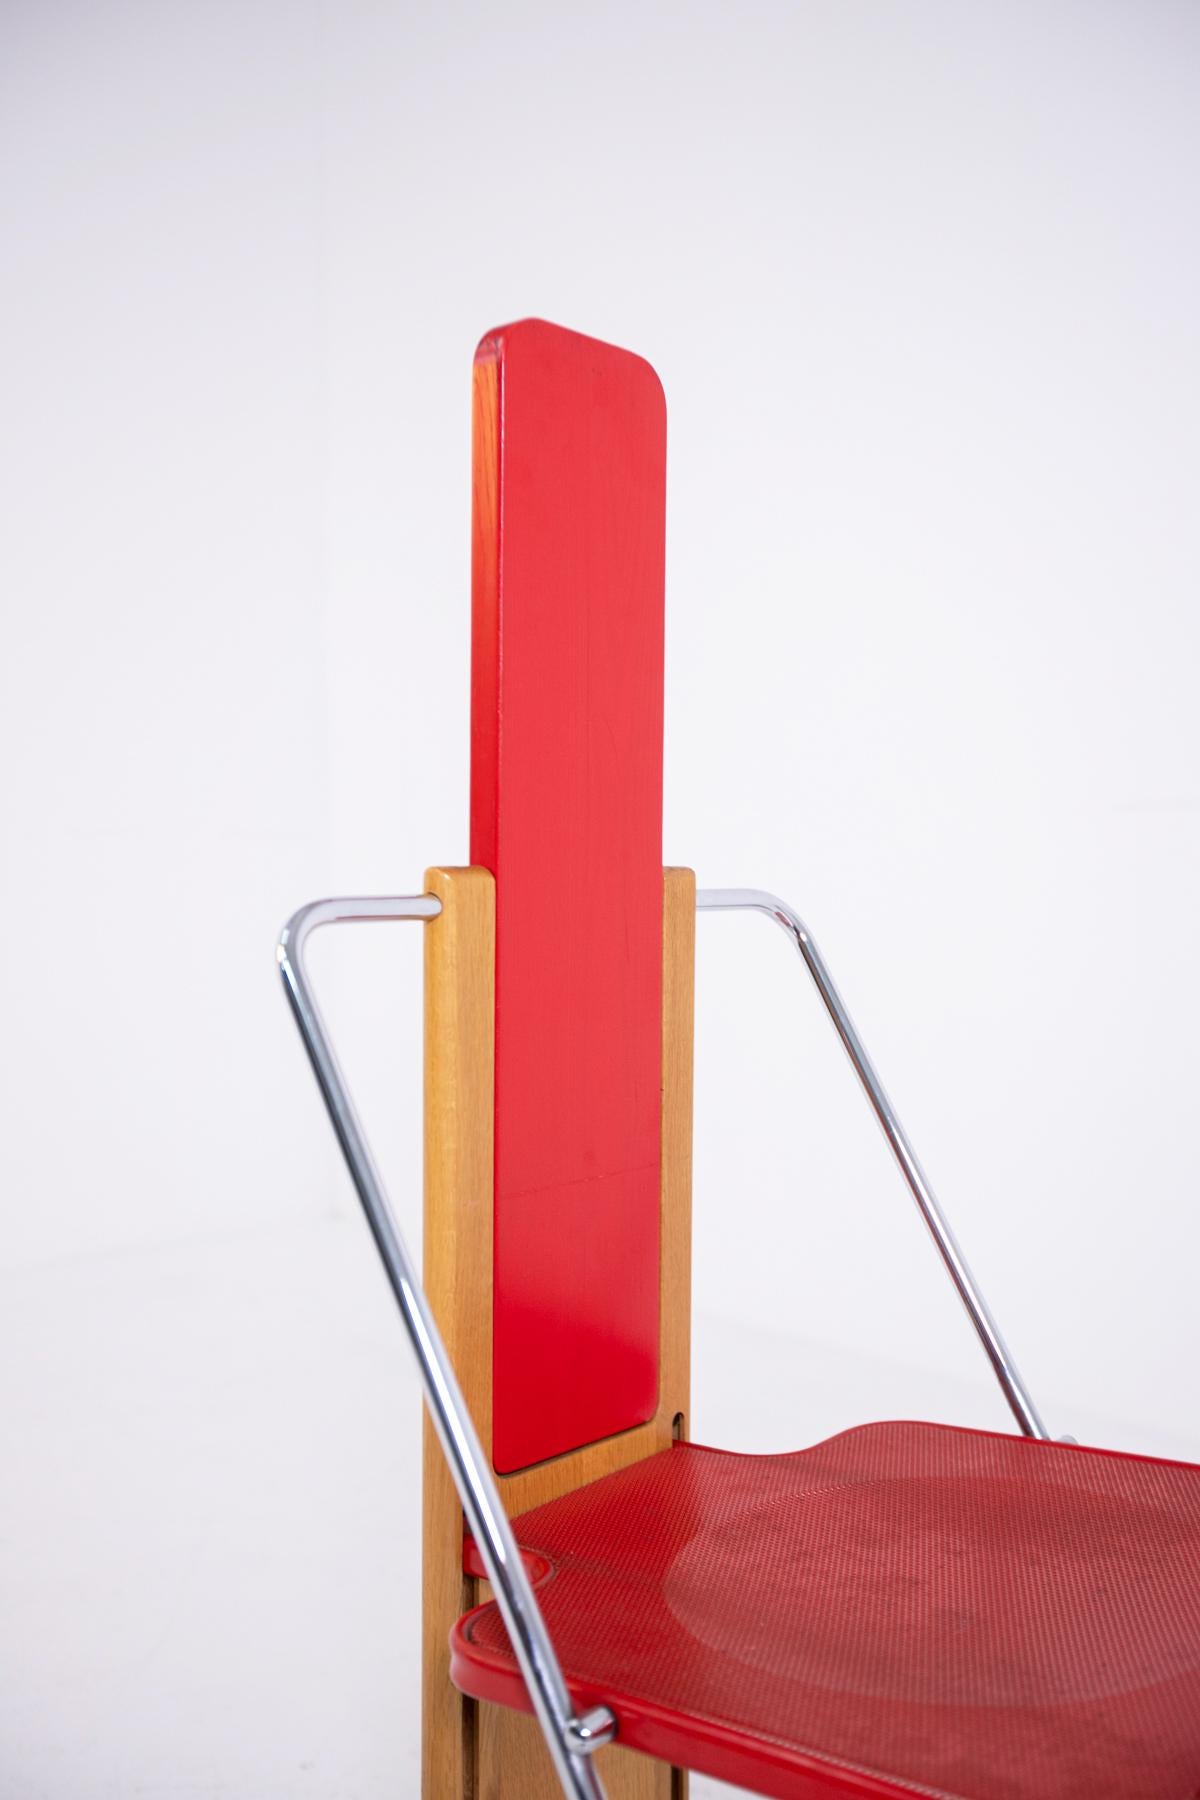 Beautiful and eccentric folding chairs designed by Mario Sabot in the 1970s.
Mario Sabot chairs are characterized not only by their extravagance, but also by the essential and minimalist lines as we can see both in the structure and in the shape of